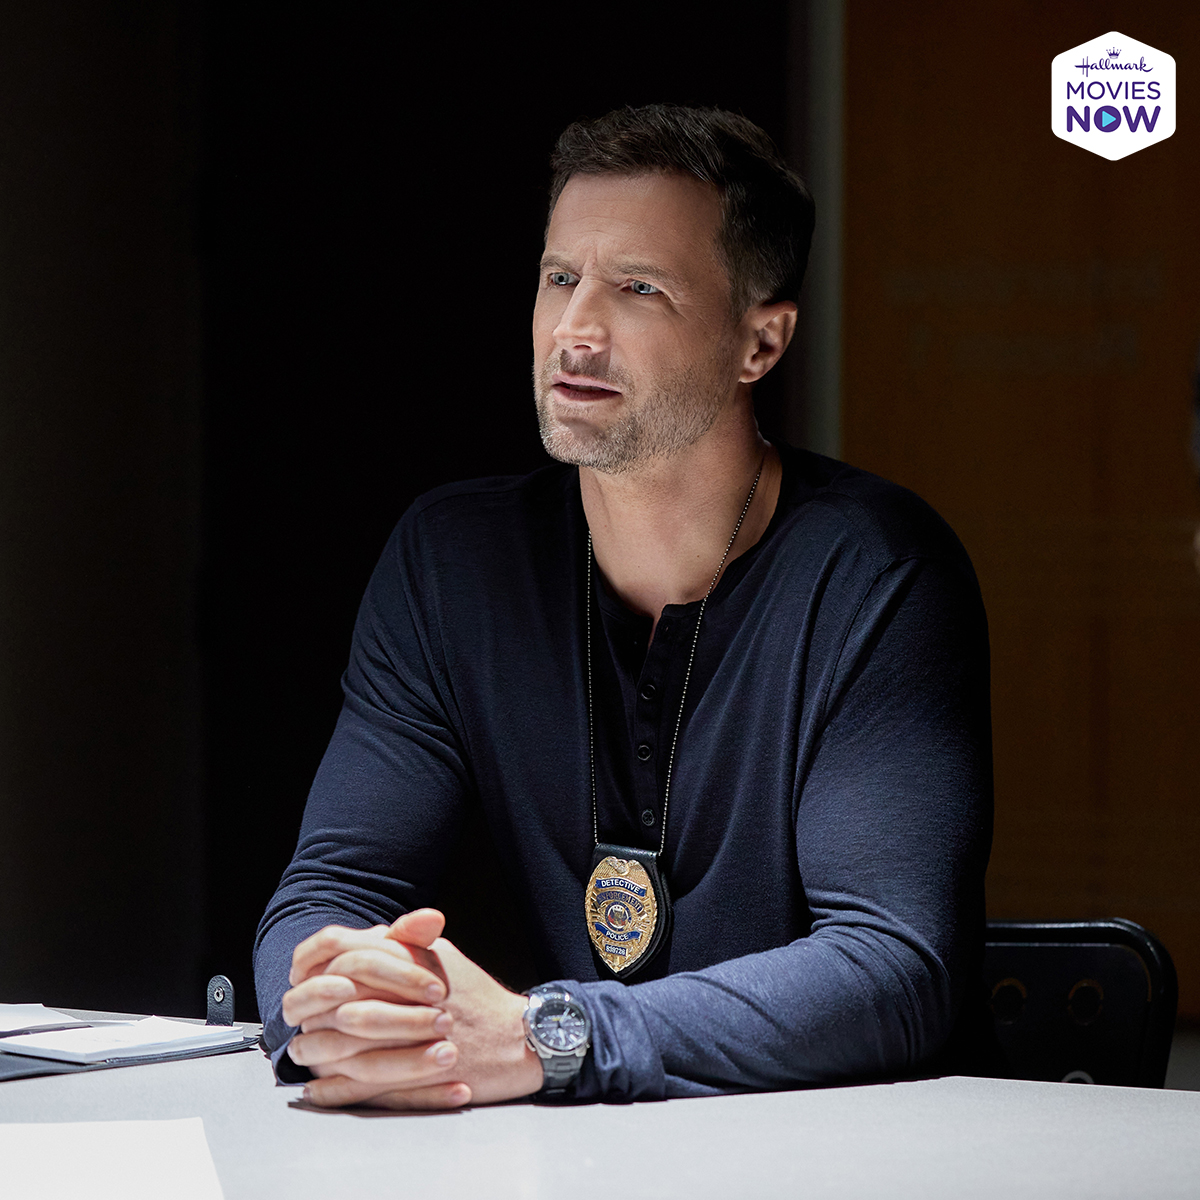 Will truths emerge in Jack's @BrendanJPenny interrogation room? Find out in the All New Hallmark Original, #FamilyPracticeMysteries: Coming Home now streaming on #HallmarkMoviesNow! #Chessies #Sleuthers